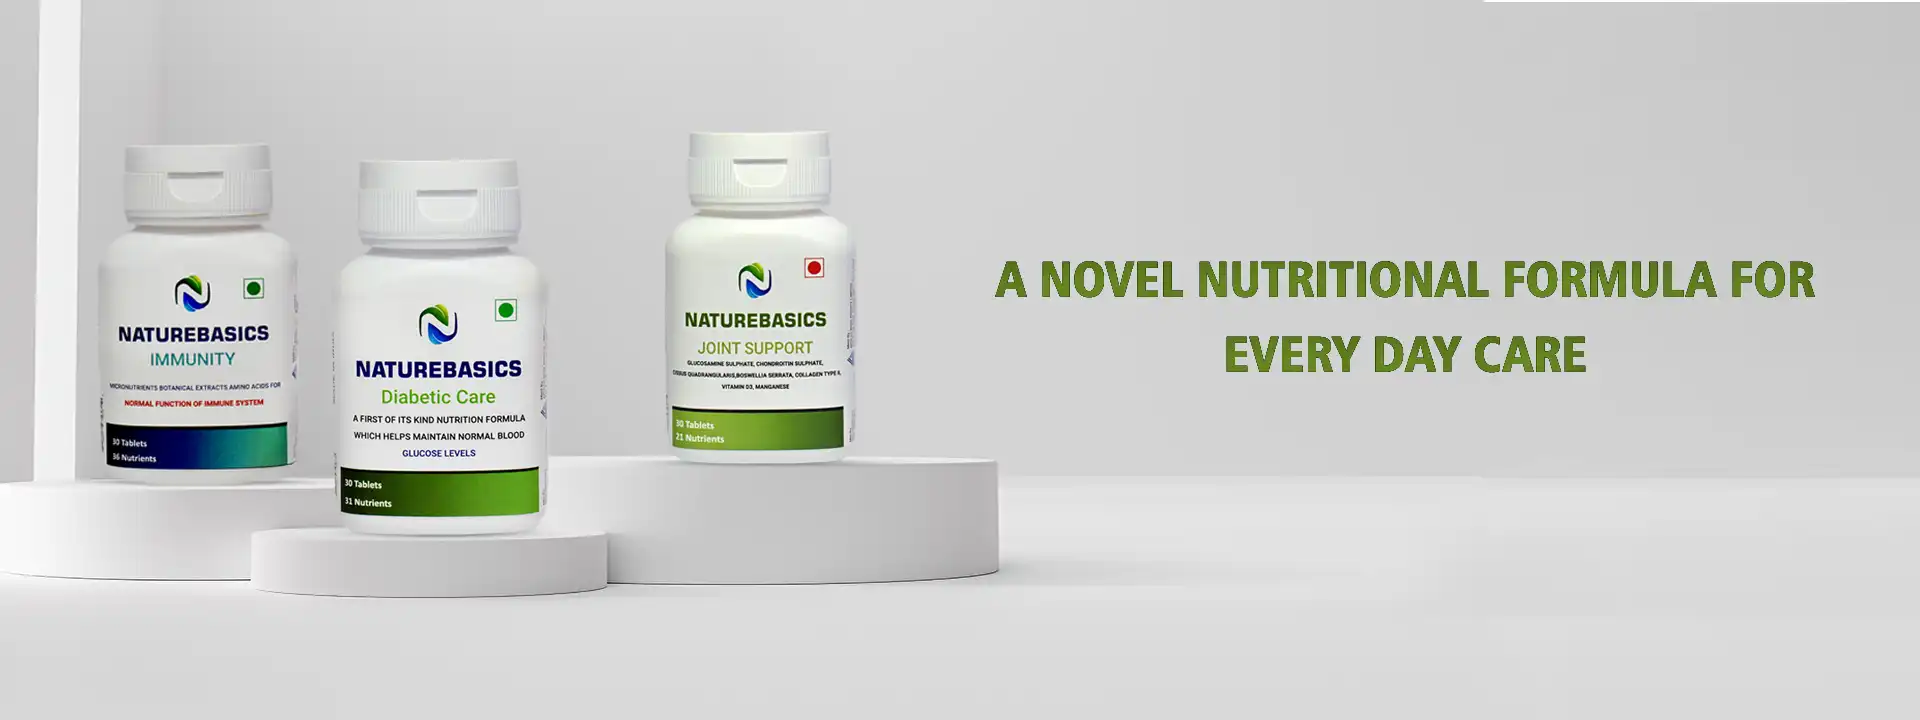 Everyday care with our nutritional formula